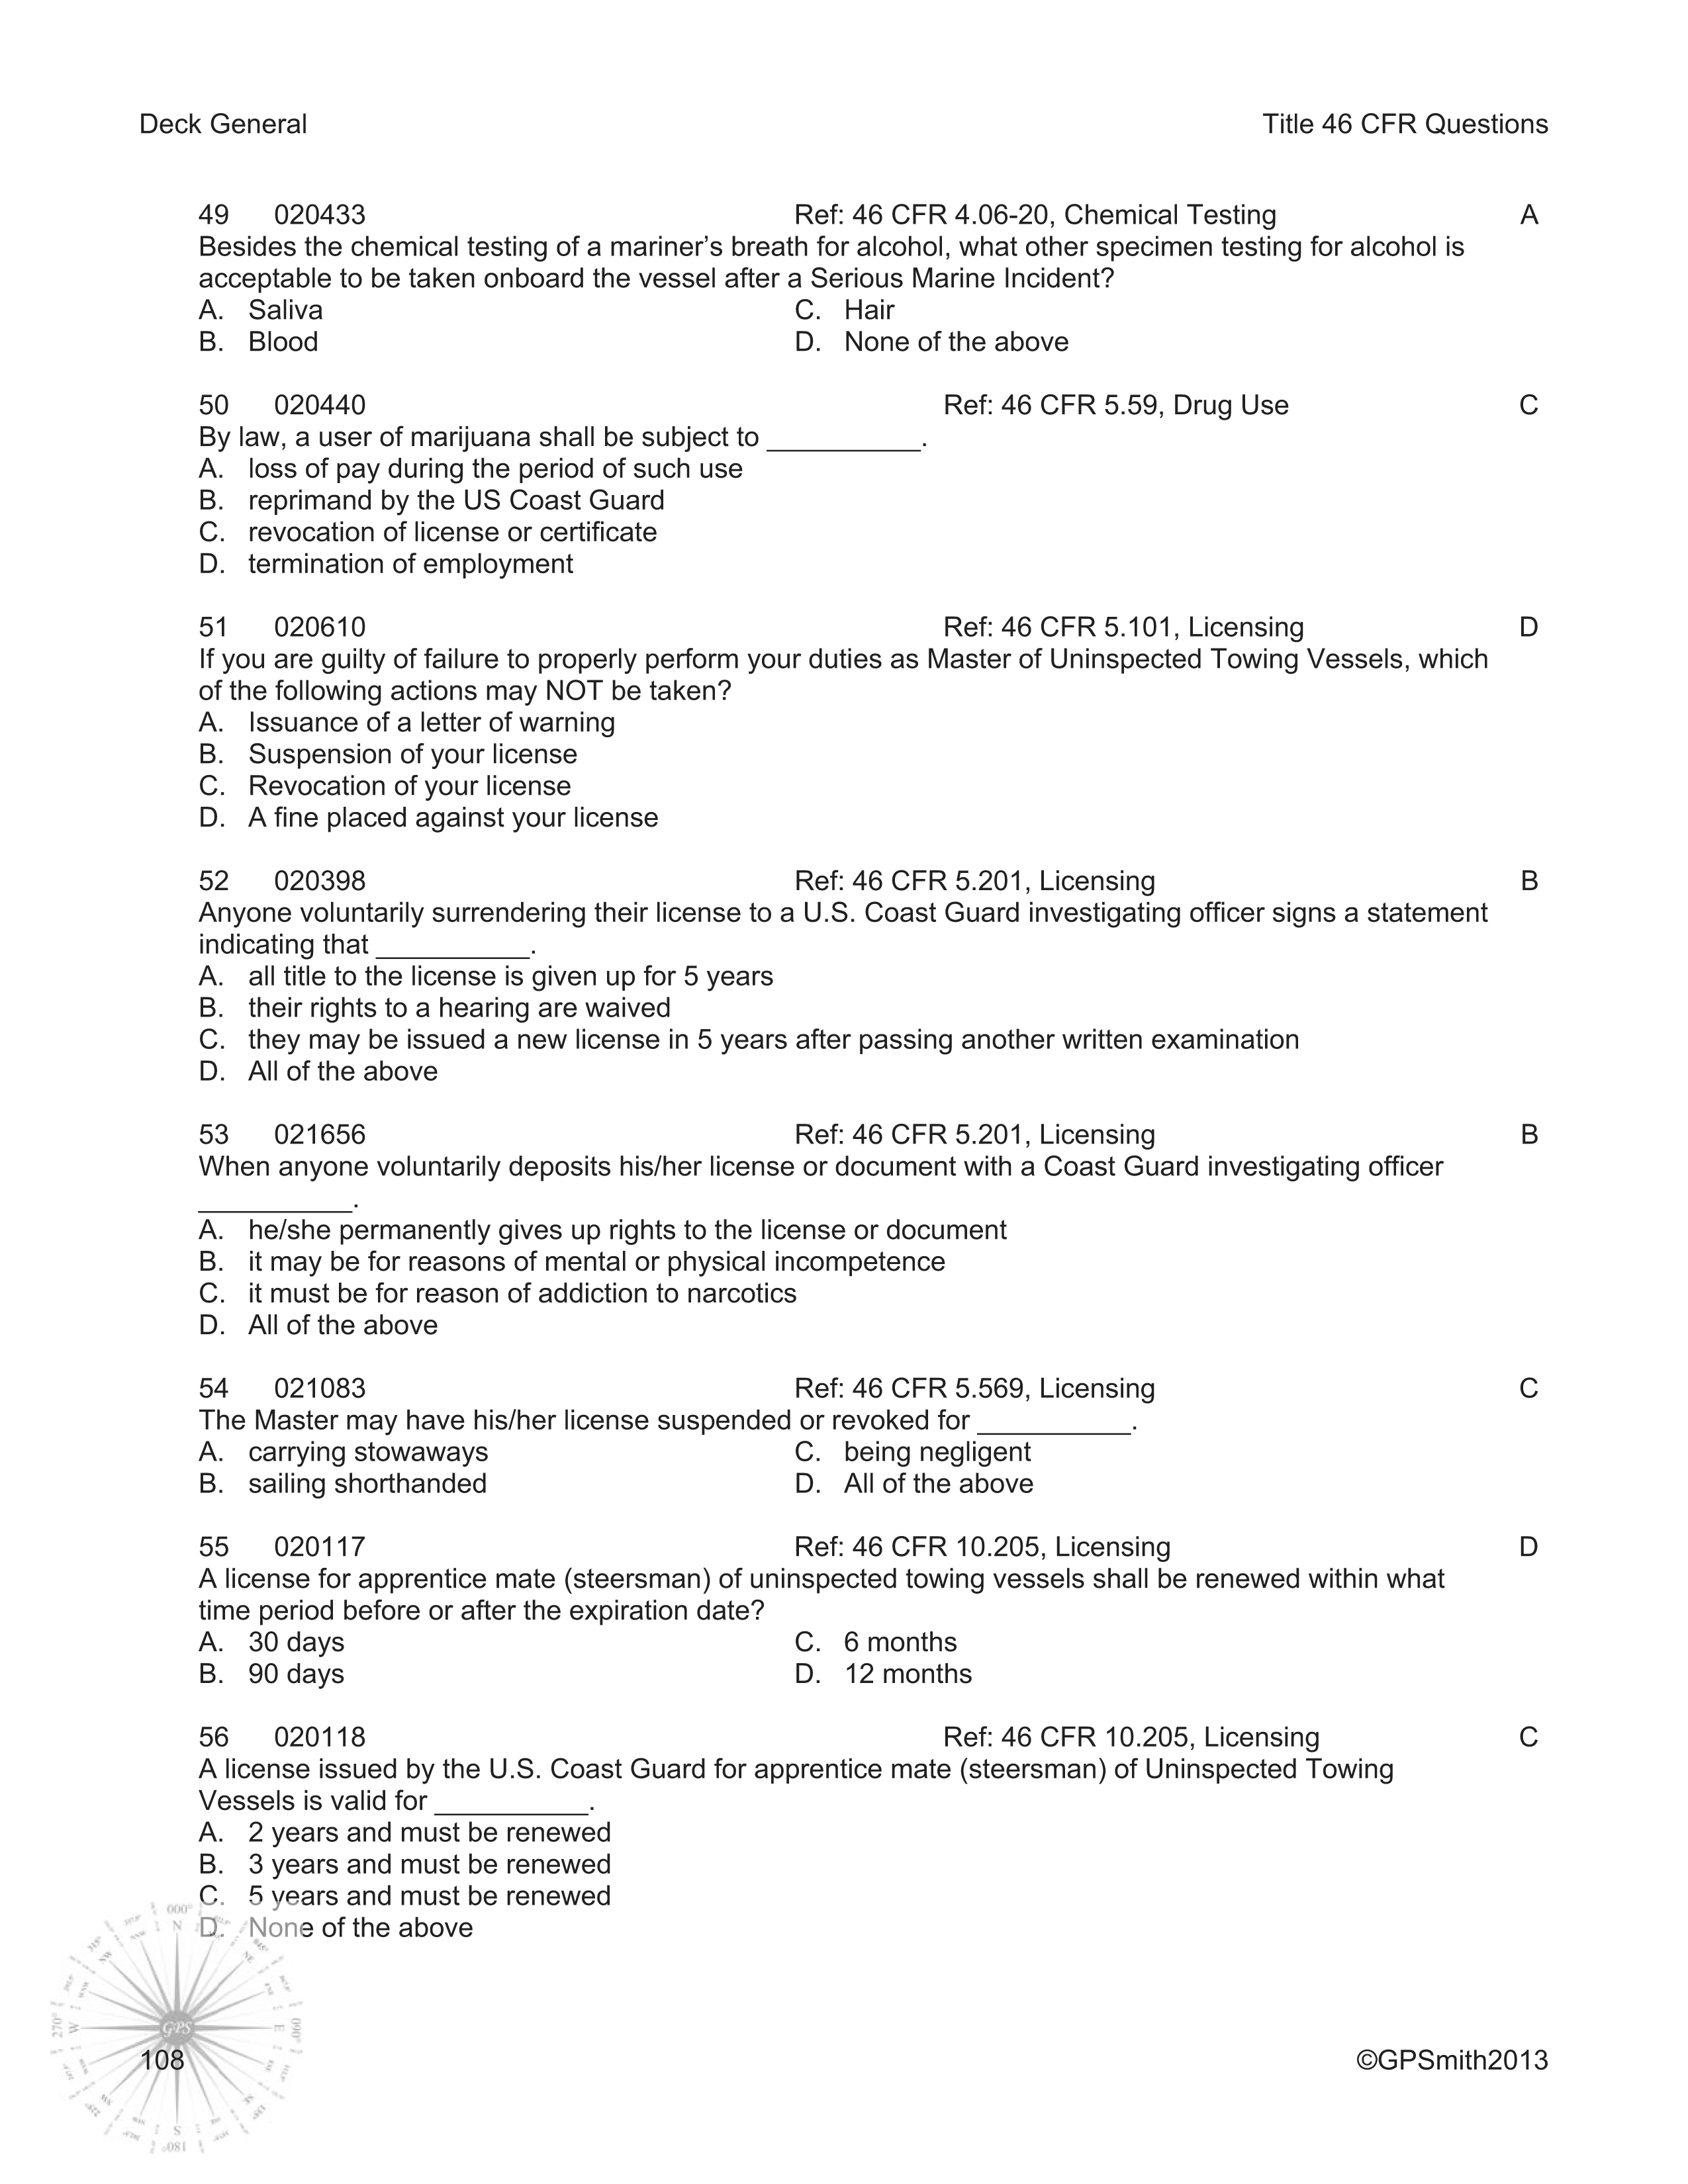 Sample Title 46 CFR Questions